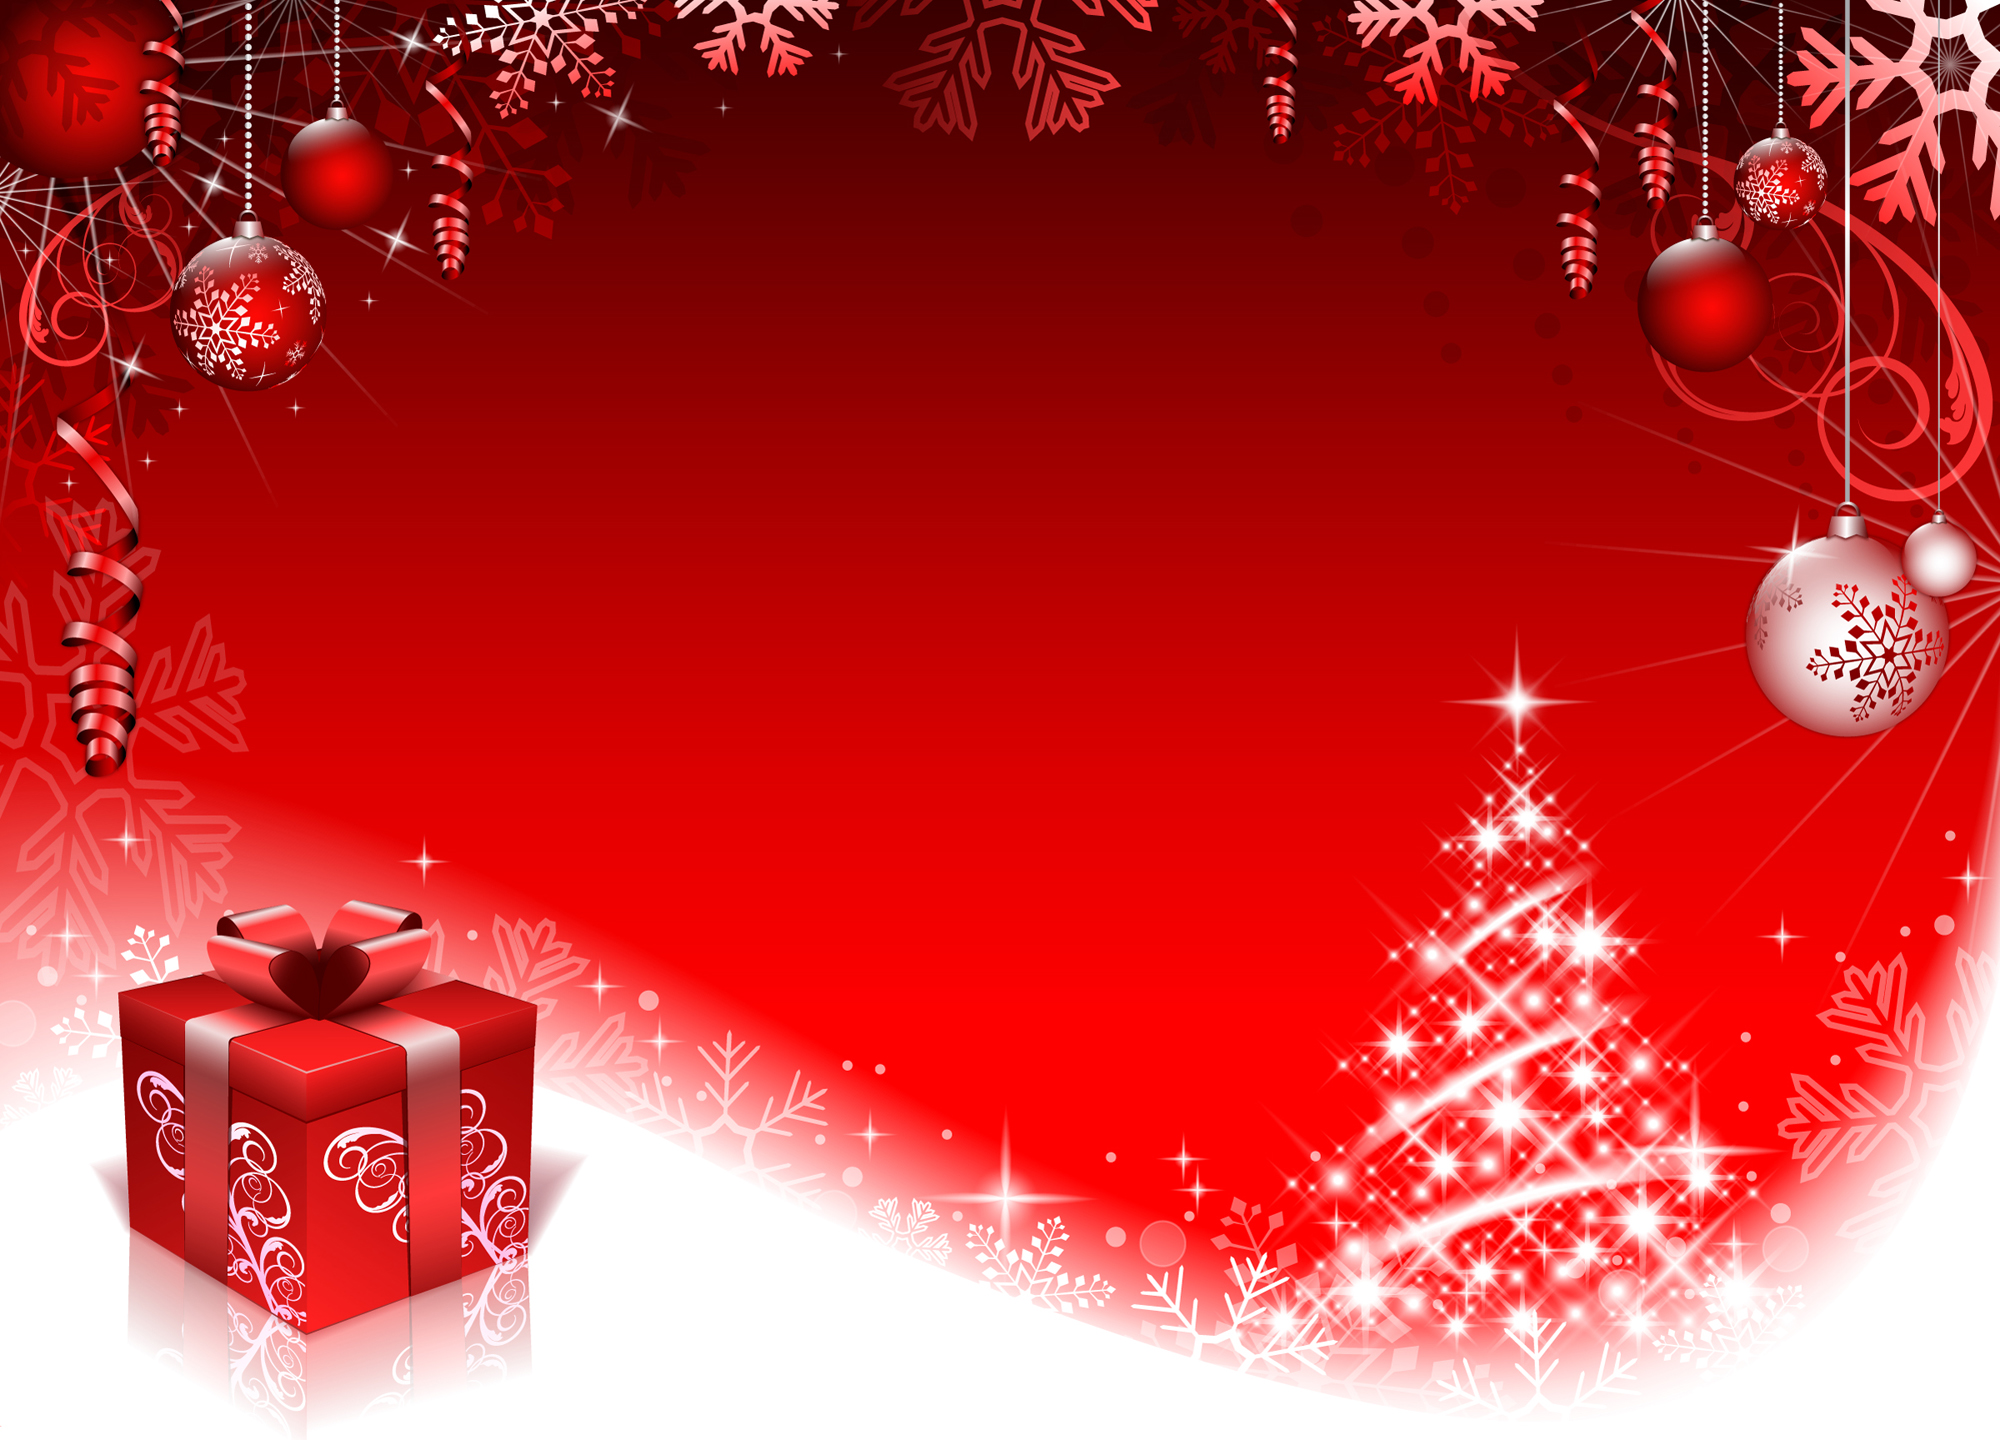 Red style Christmas background art vector 01 - Vector ...
